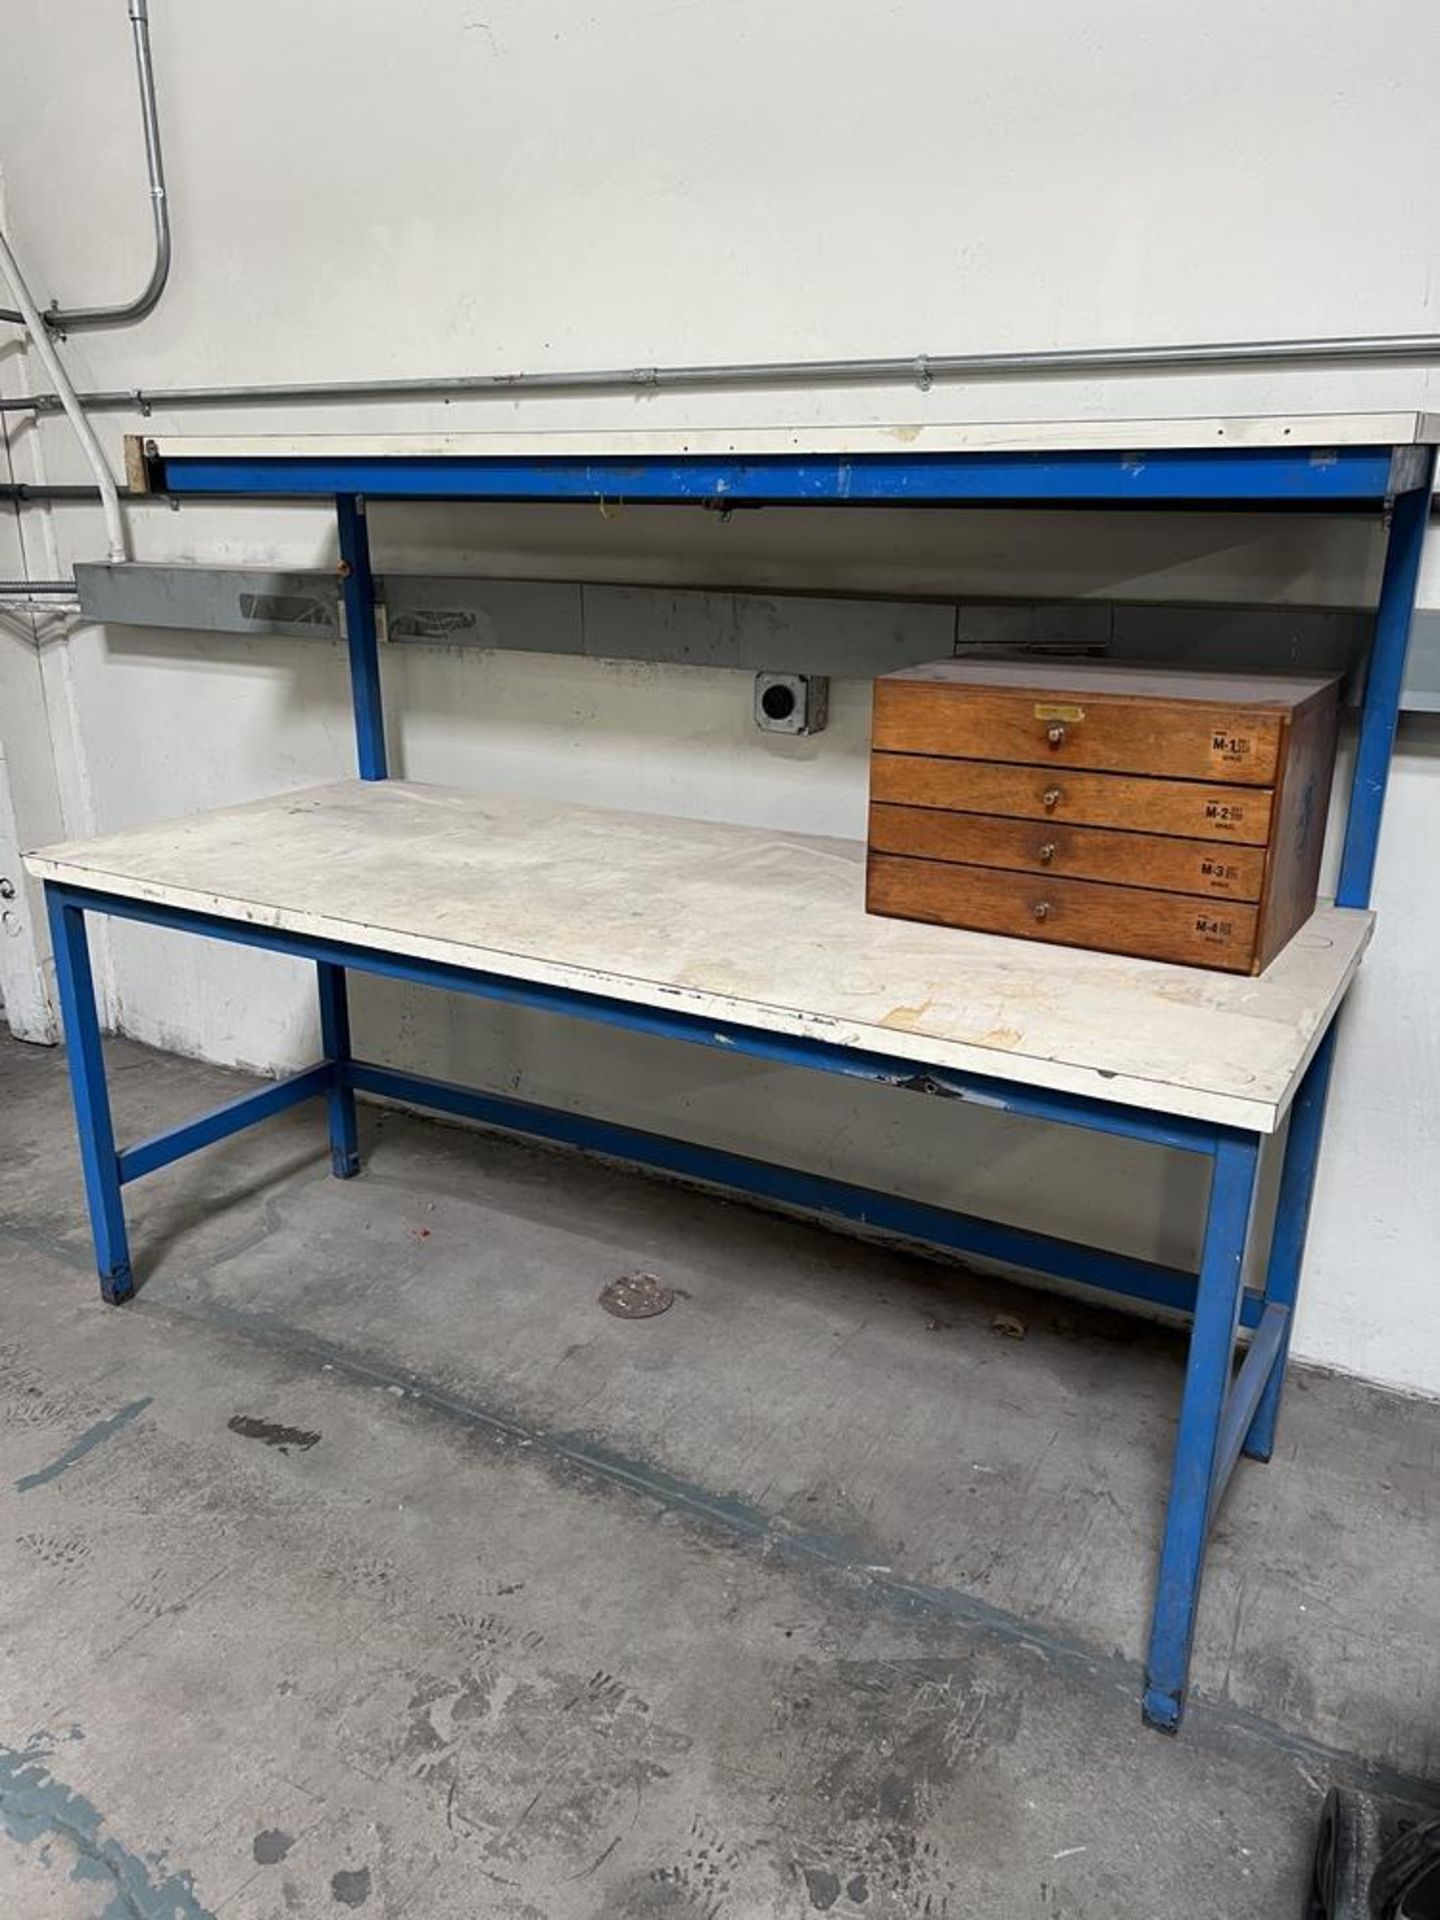 2 Tier Work Table 72" x 30" x 31" (No Other Contents) - Image 2 of 2